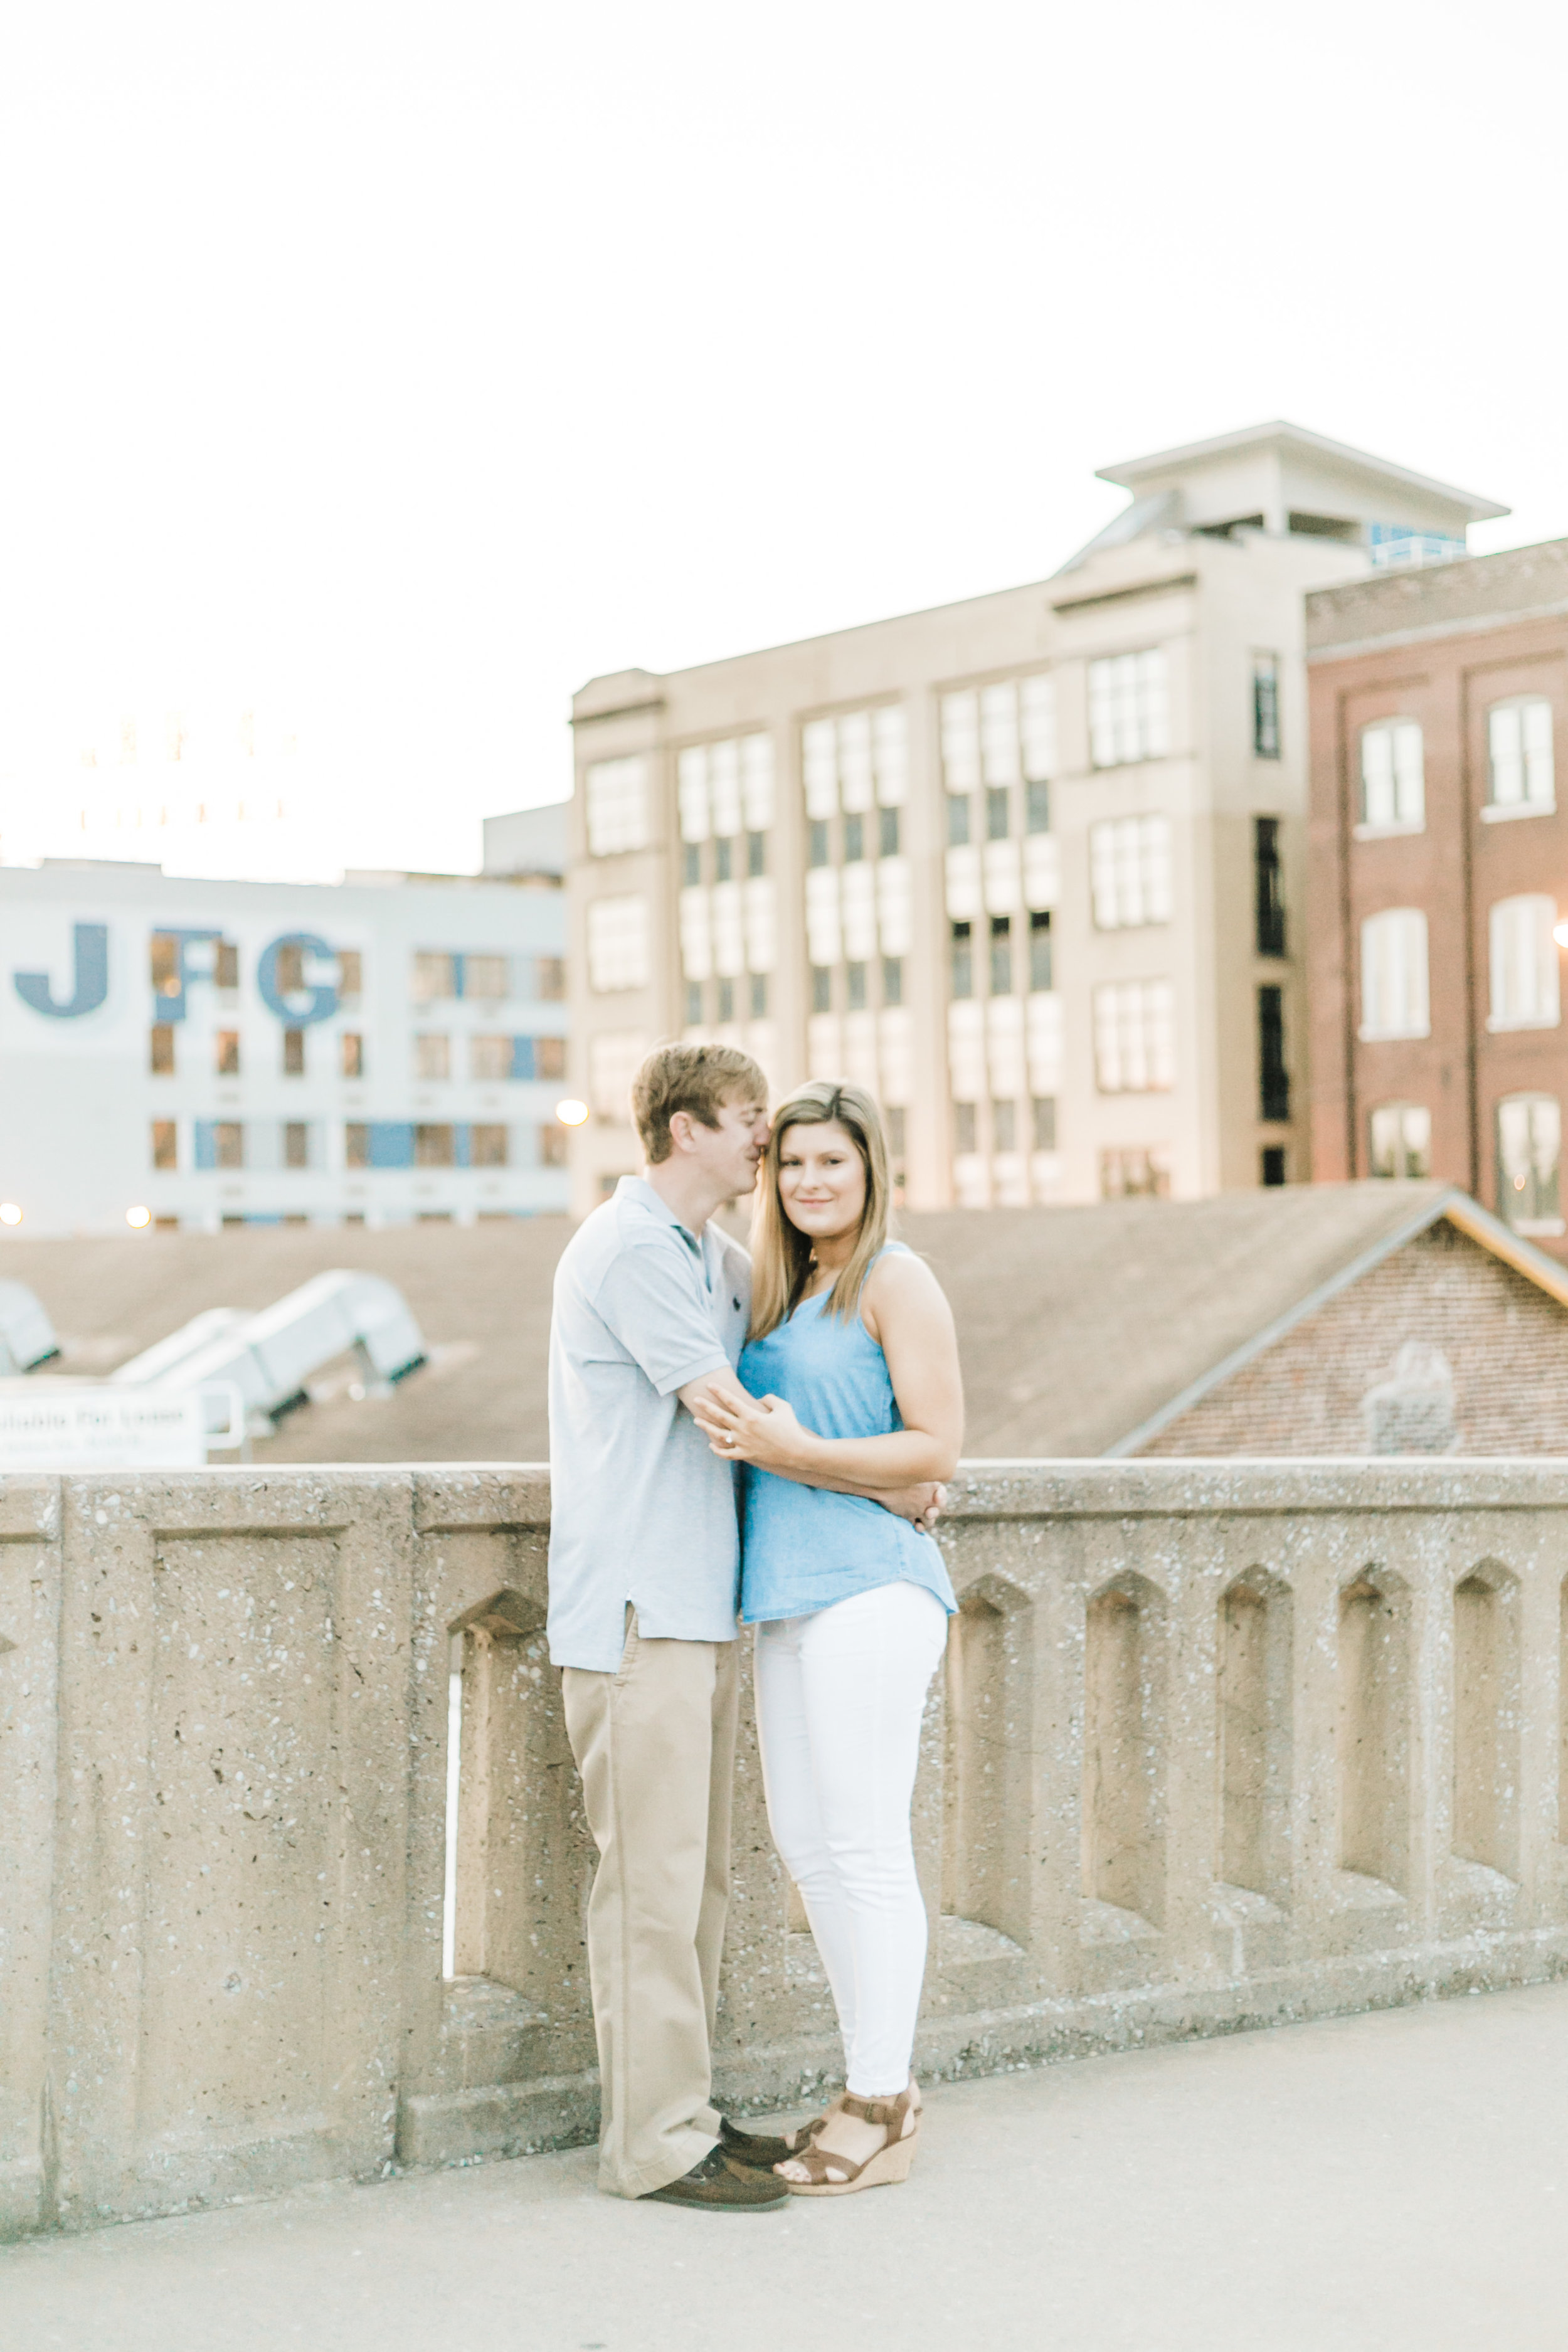 Downtown Knoxville, Tennessee Engagement Photos - The Overwhelmed Bride Wedding Blog